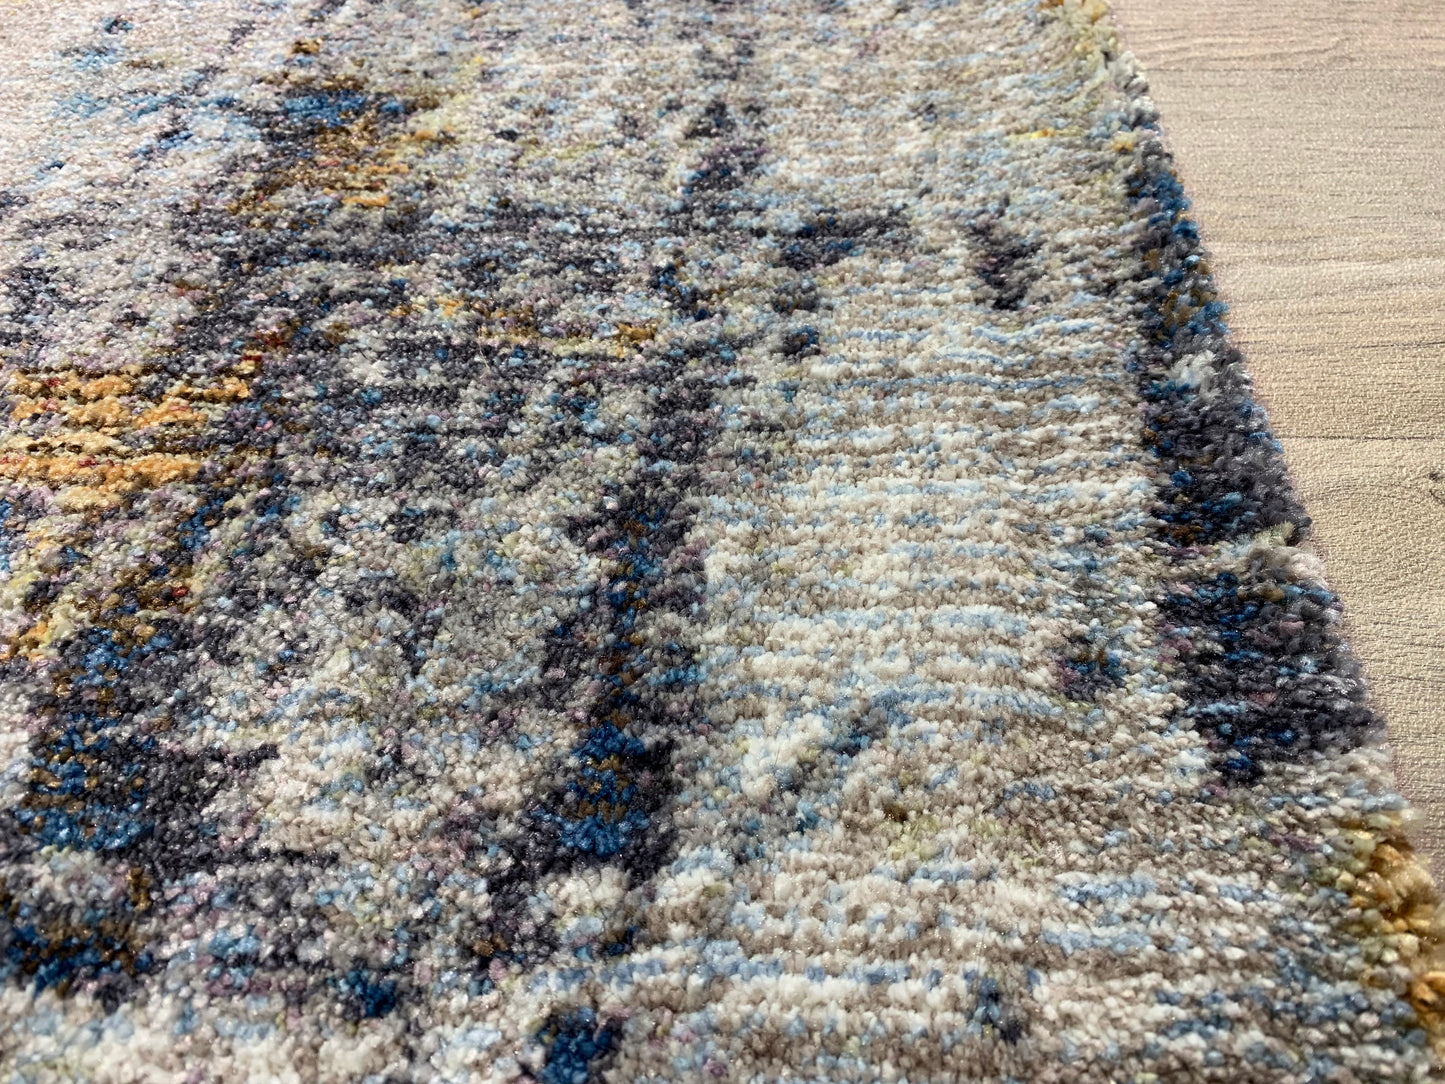 IN-201: Synthetic fiber rug